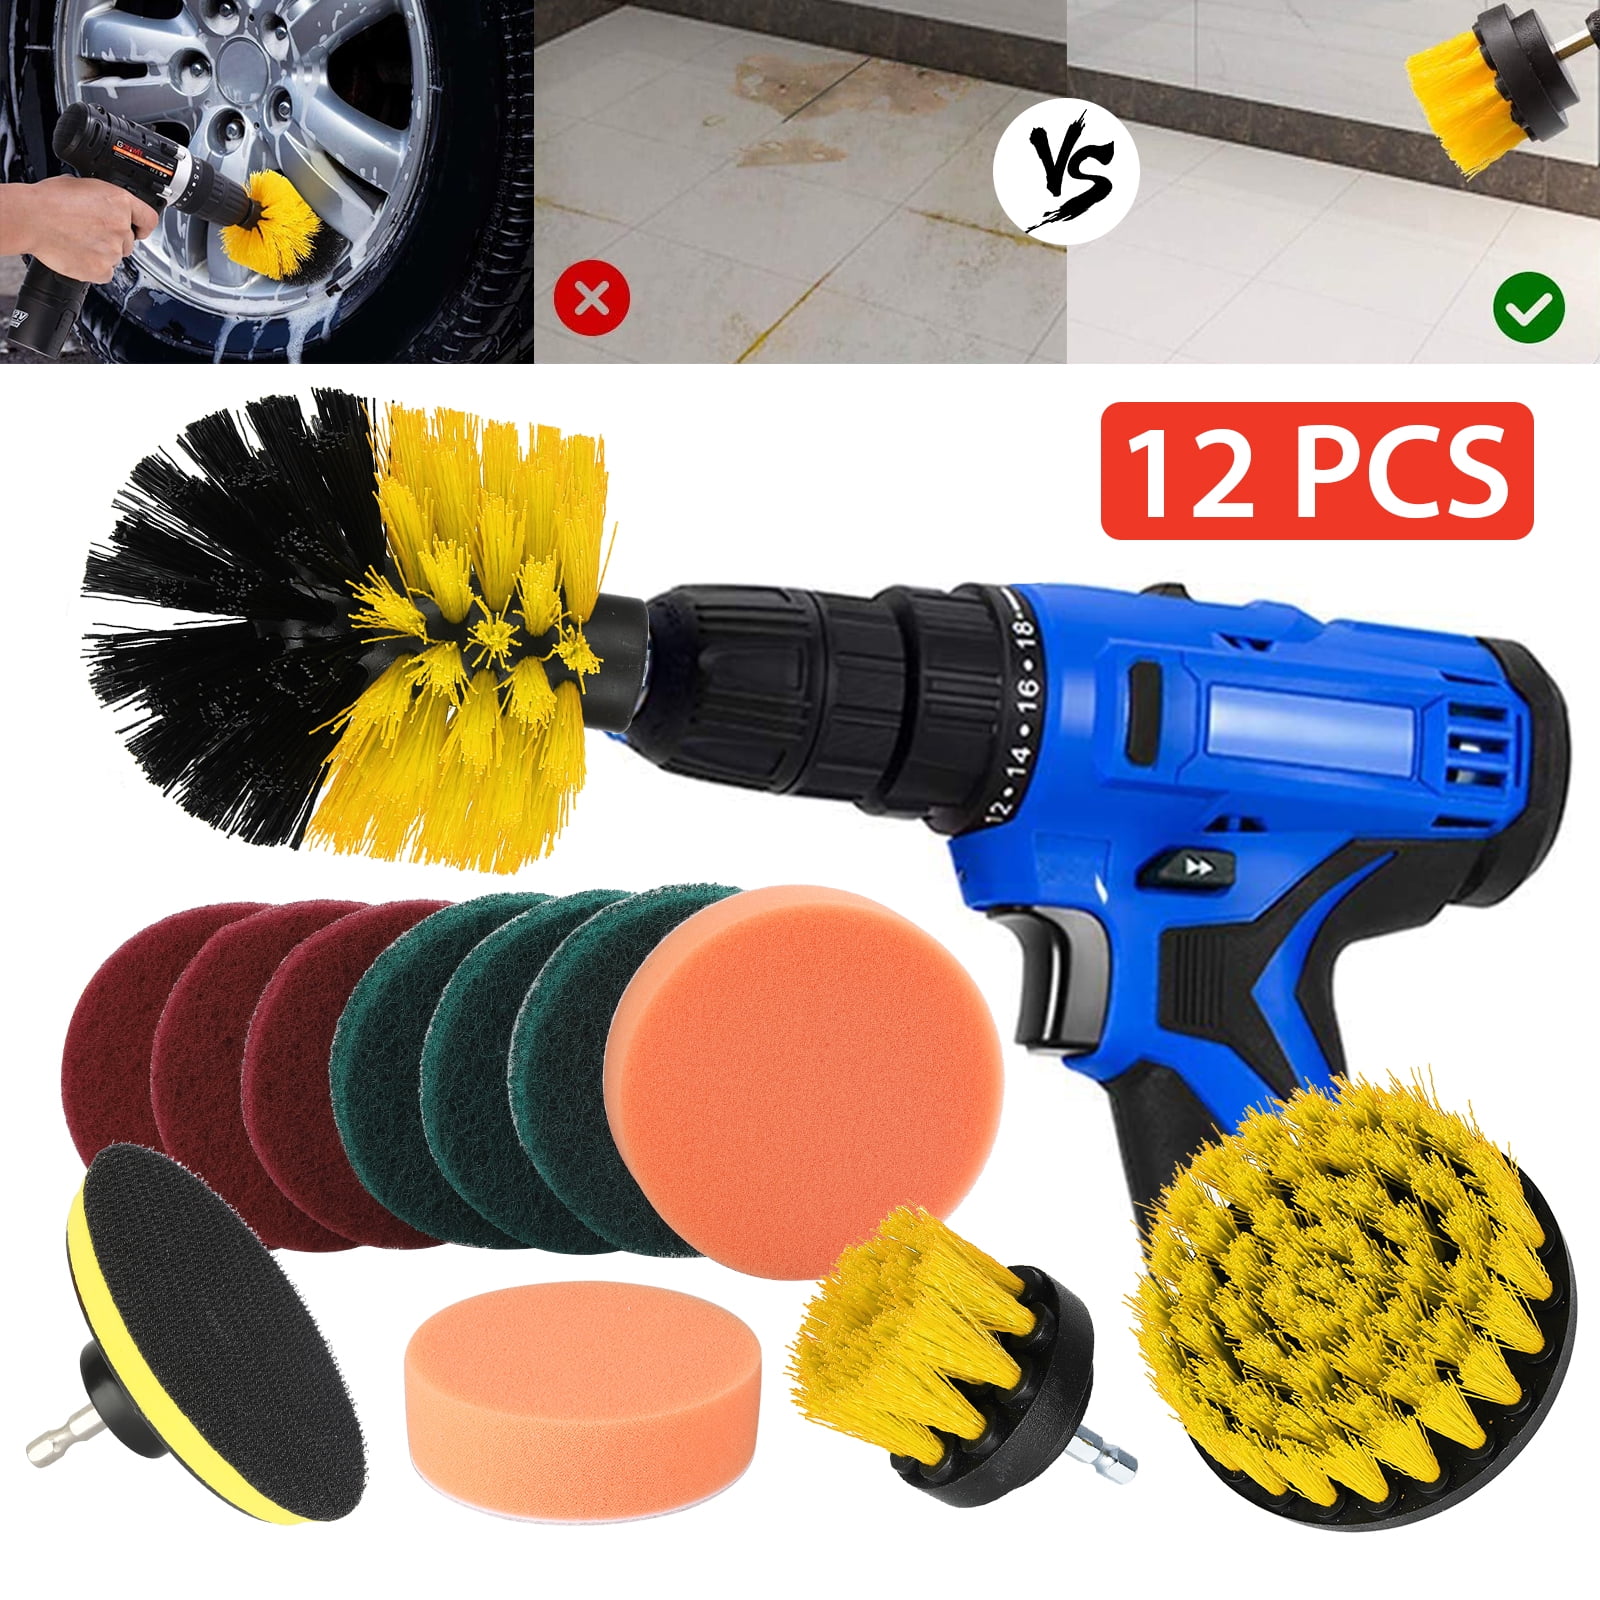 Drill Brush Set Power Scrubber Brushes Cleaner For Car Carpet Wall Tile Cleaning 